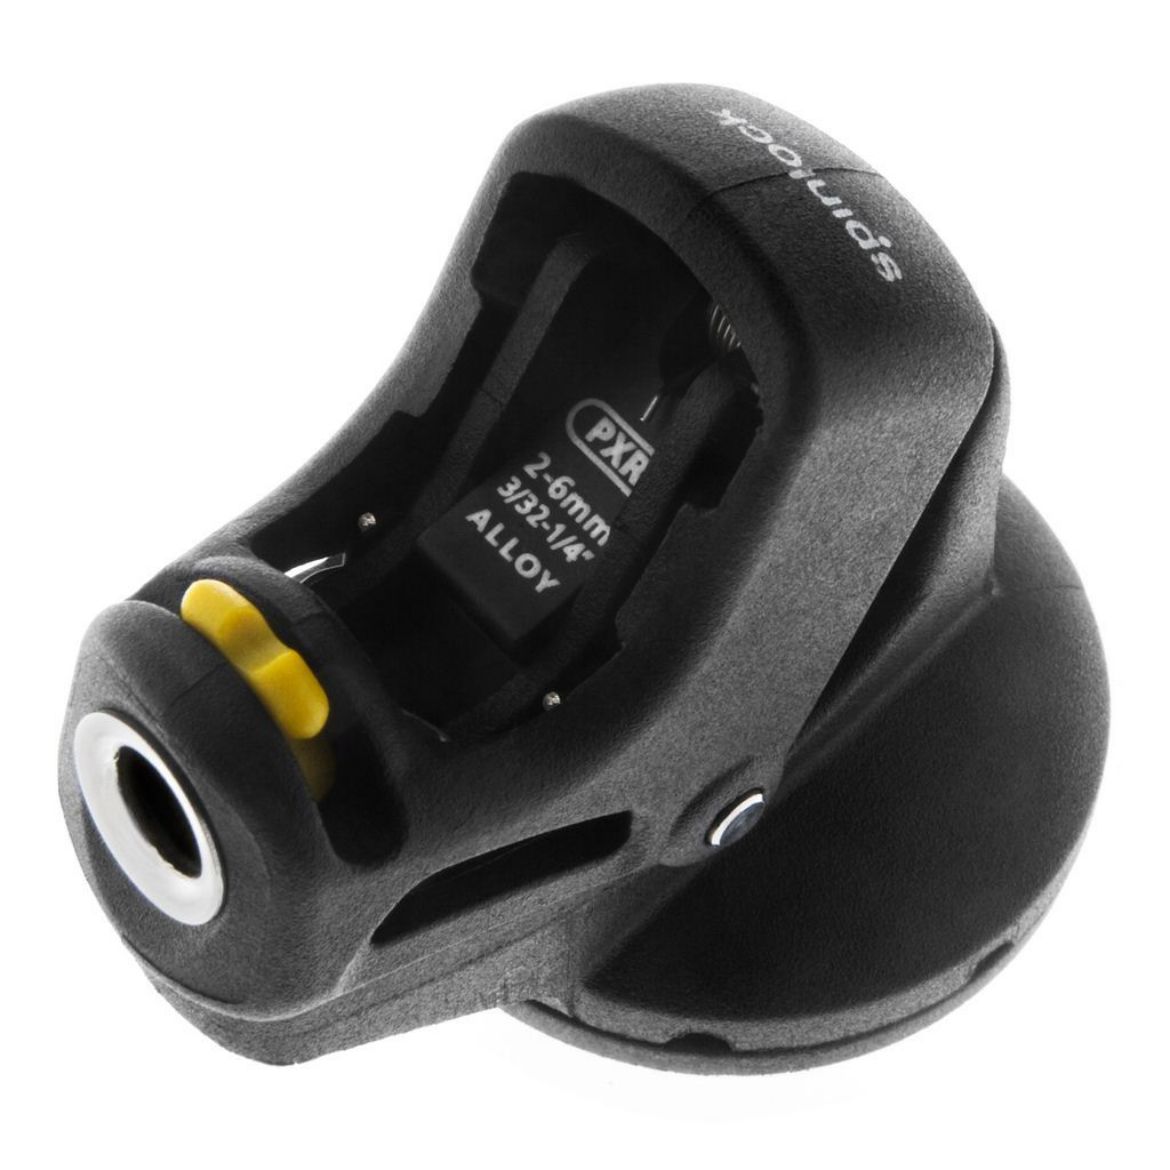 Picture of Spinlock PXR 2-6mm Swivel Base Cam Cleat